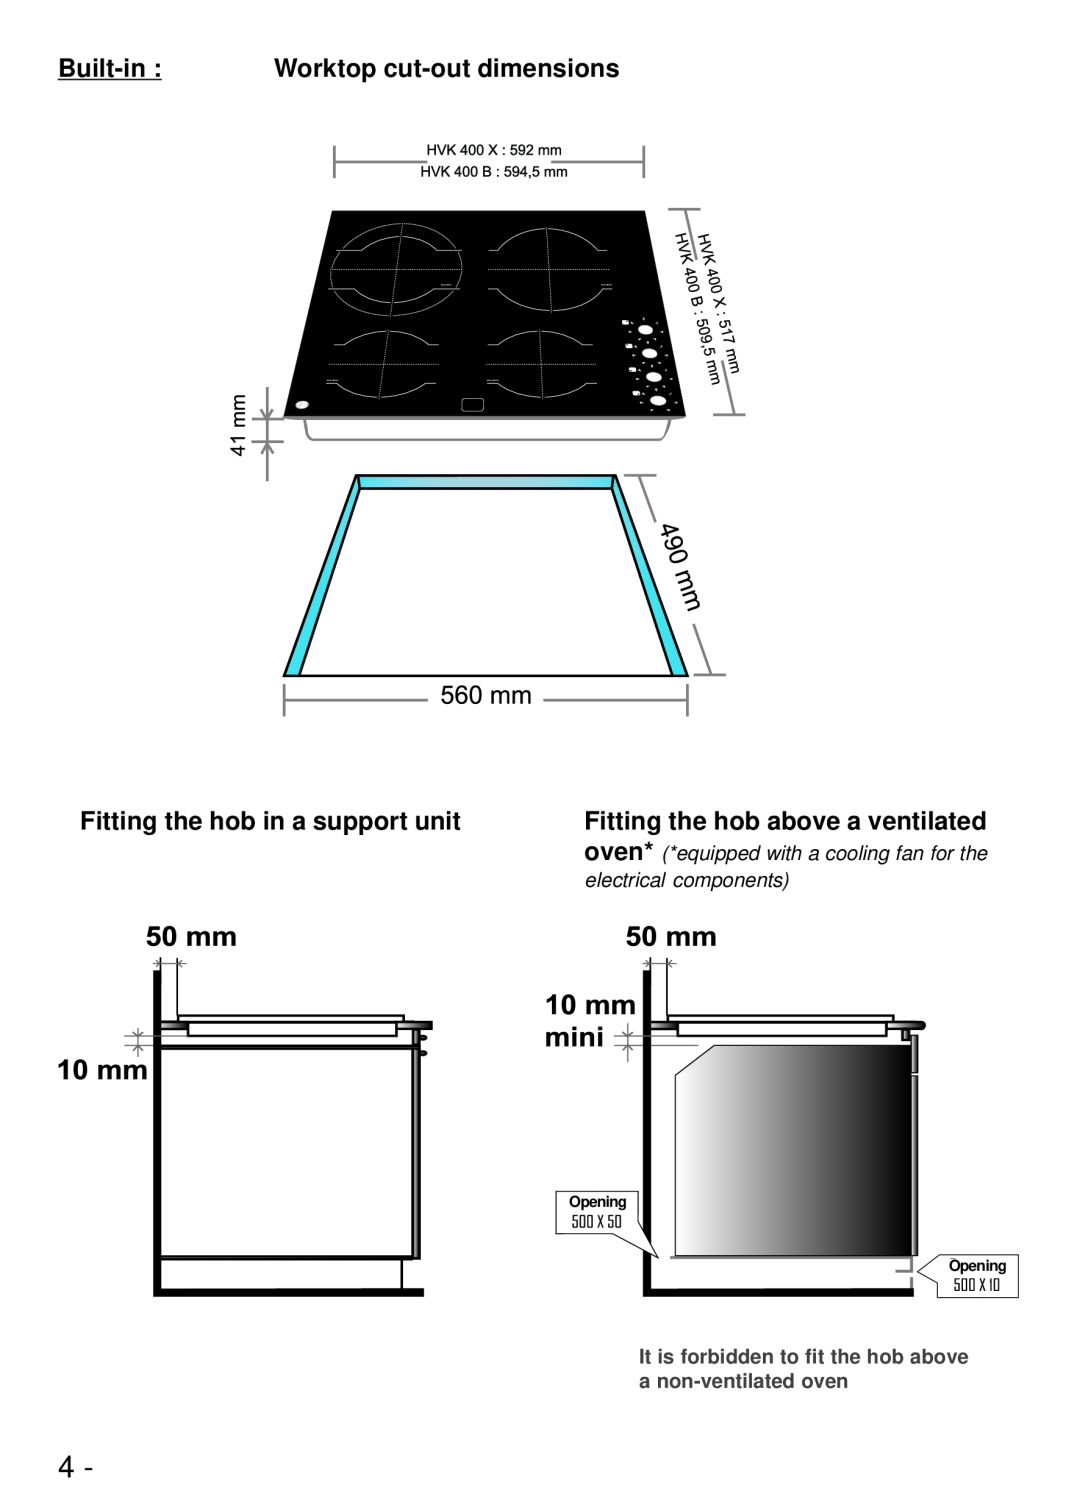 Hoover HVK 400 Built-in Worktop cut-out dimensions, Fitting the hob in a support unit, Fitting the hob above a ventilated 